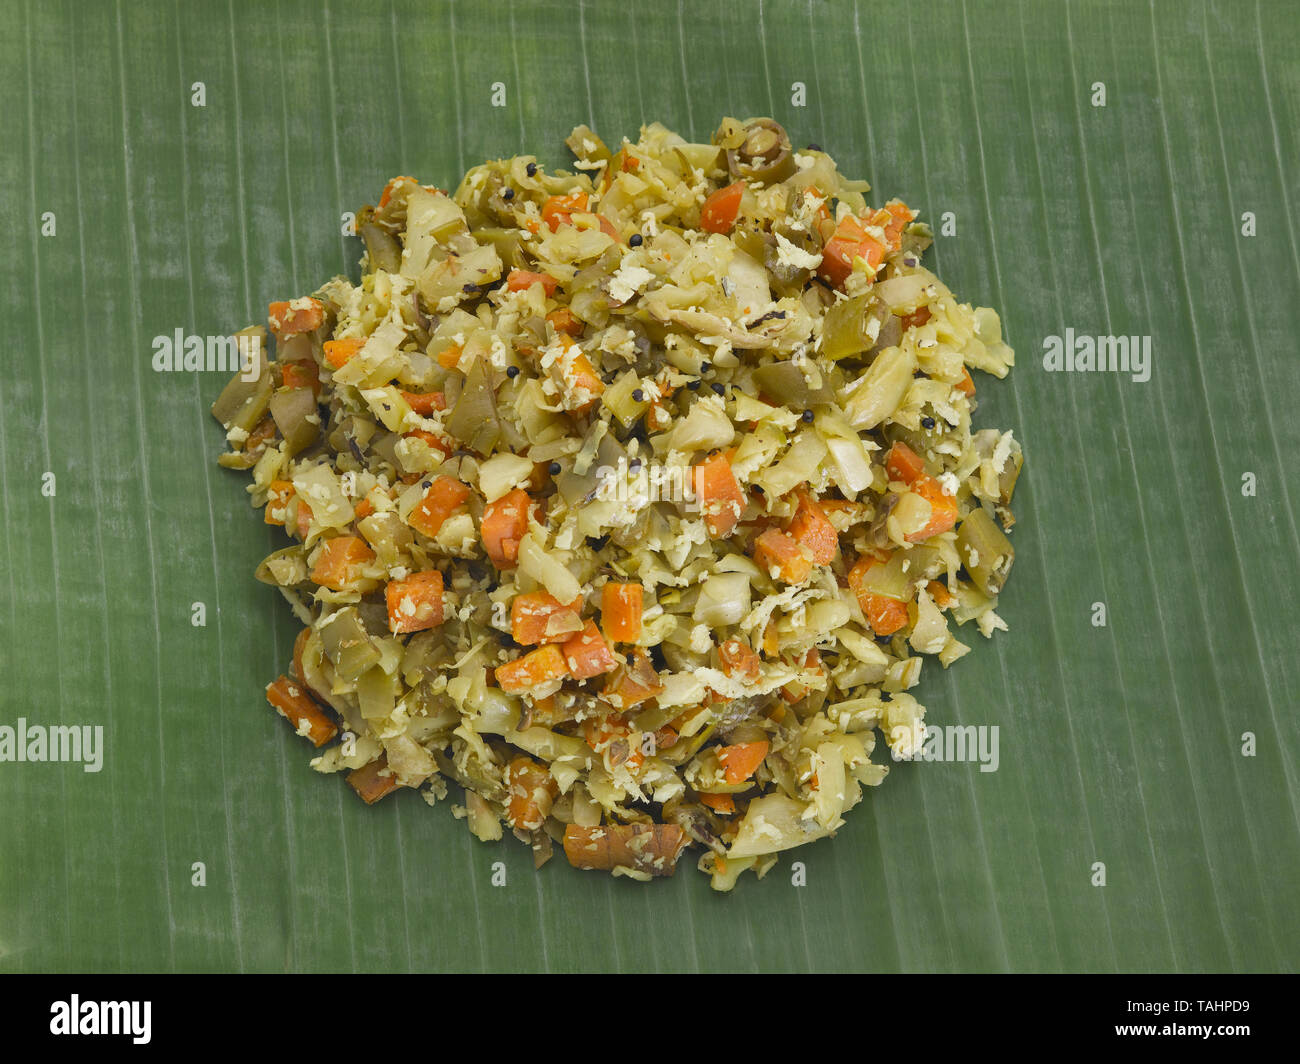 PORIYAL- A VEGETABLE SERVED IN A  TRADITIONAL TAMIL LUNCH ON A GREEN PLANTAIN LEAF Stock Photo